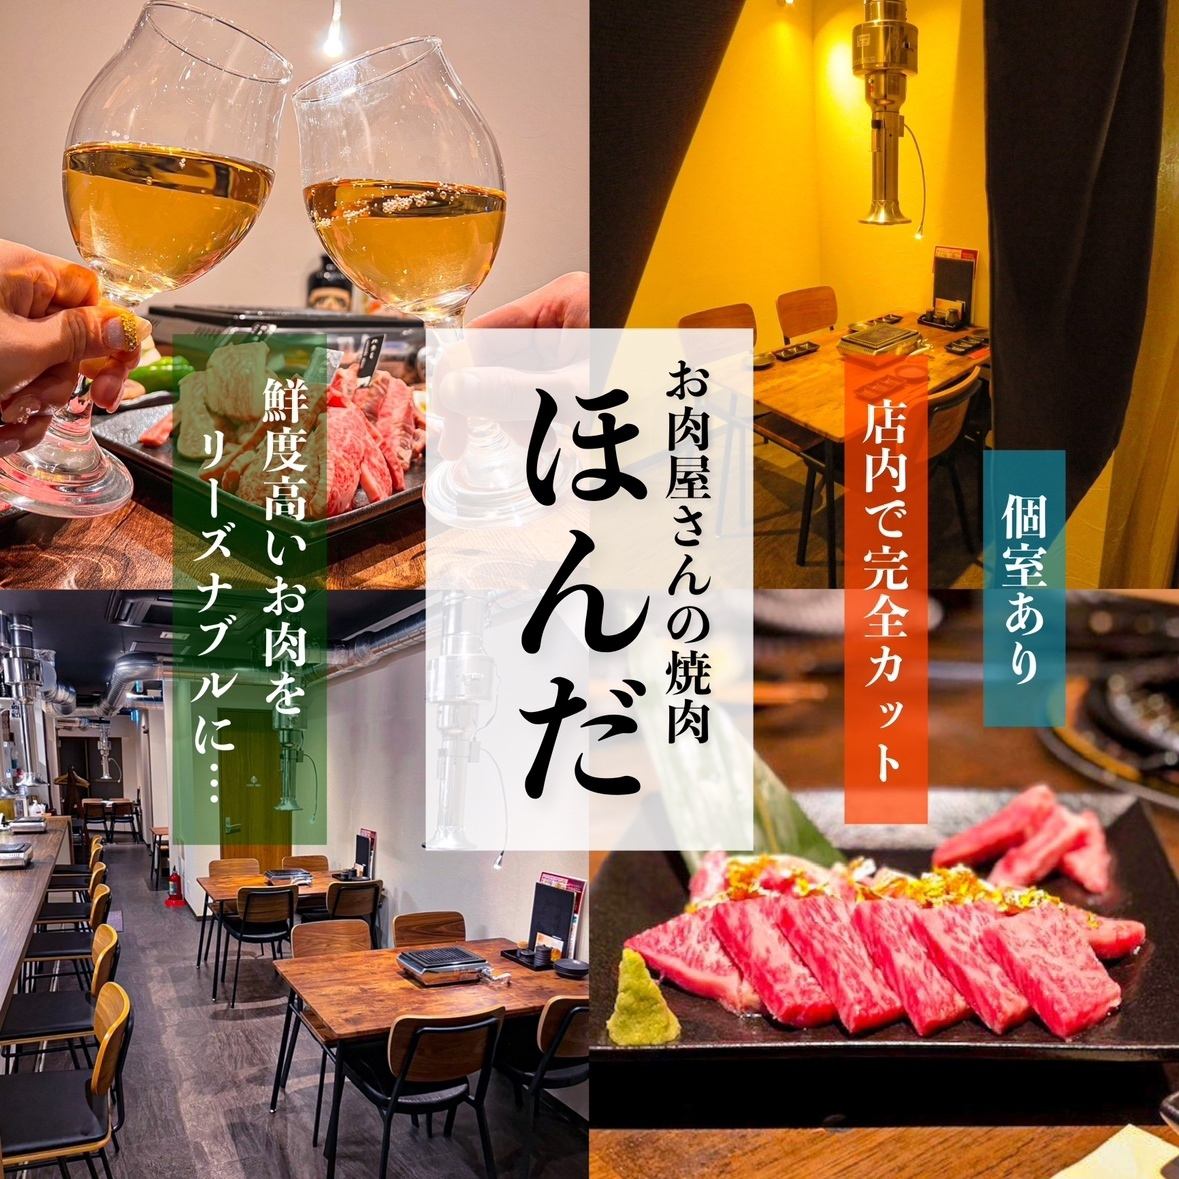 Private room for up to 6 people.Savor Wagyu beef [120 minutes all-you-can-drink]! Manpuku course 5,500 yen